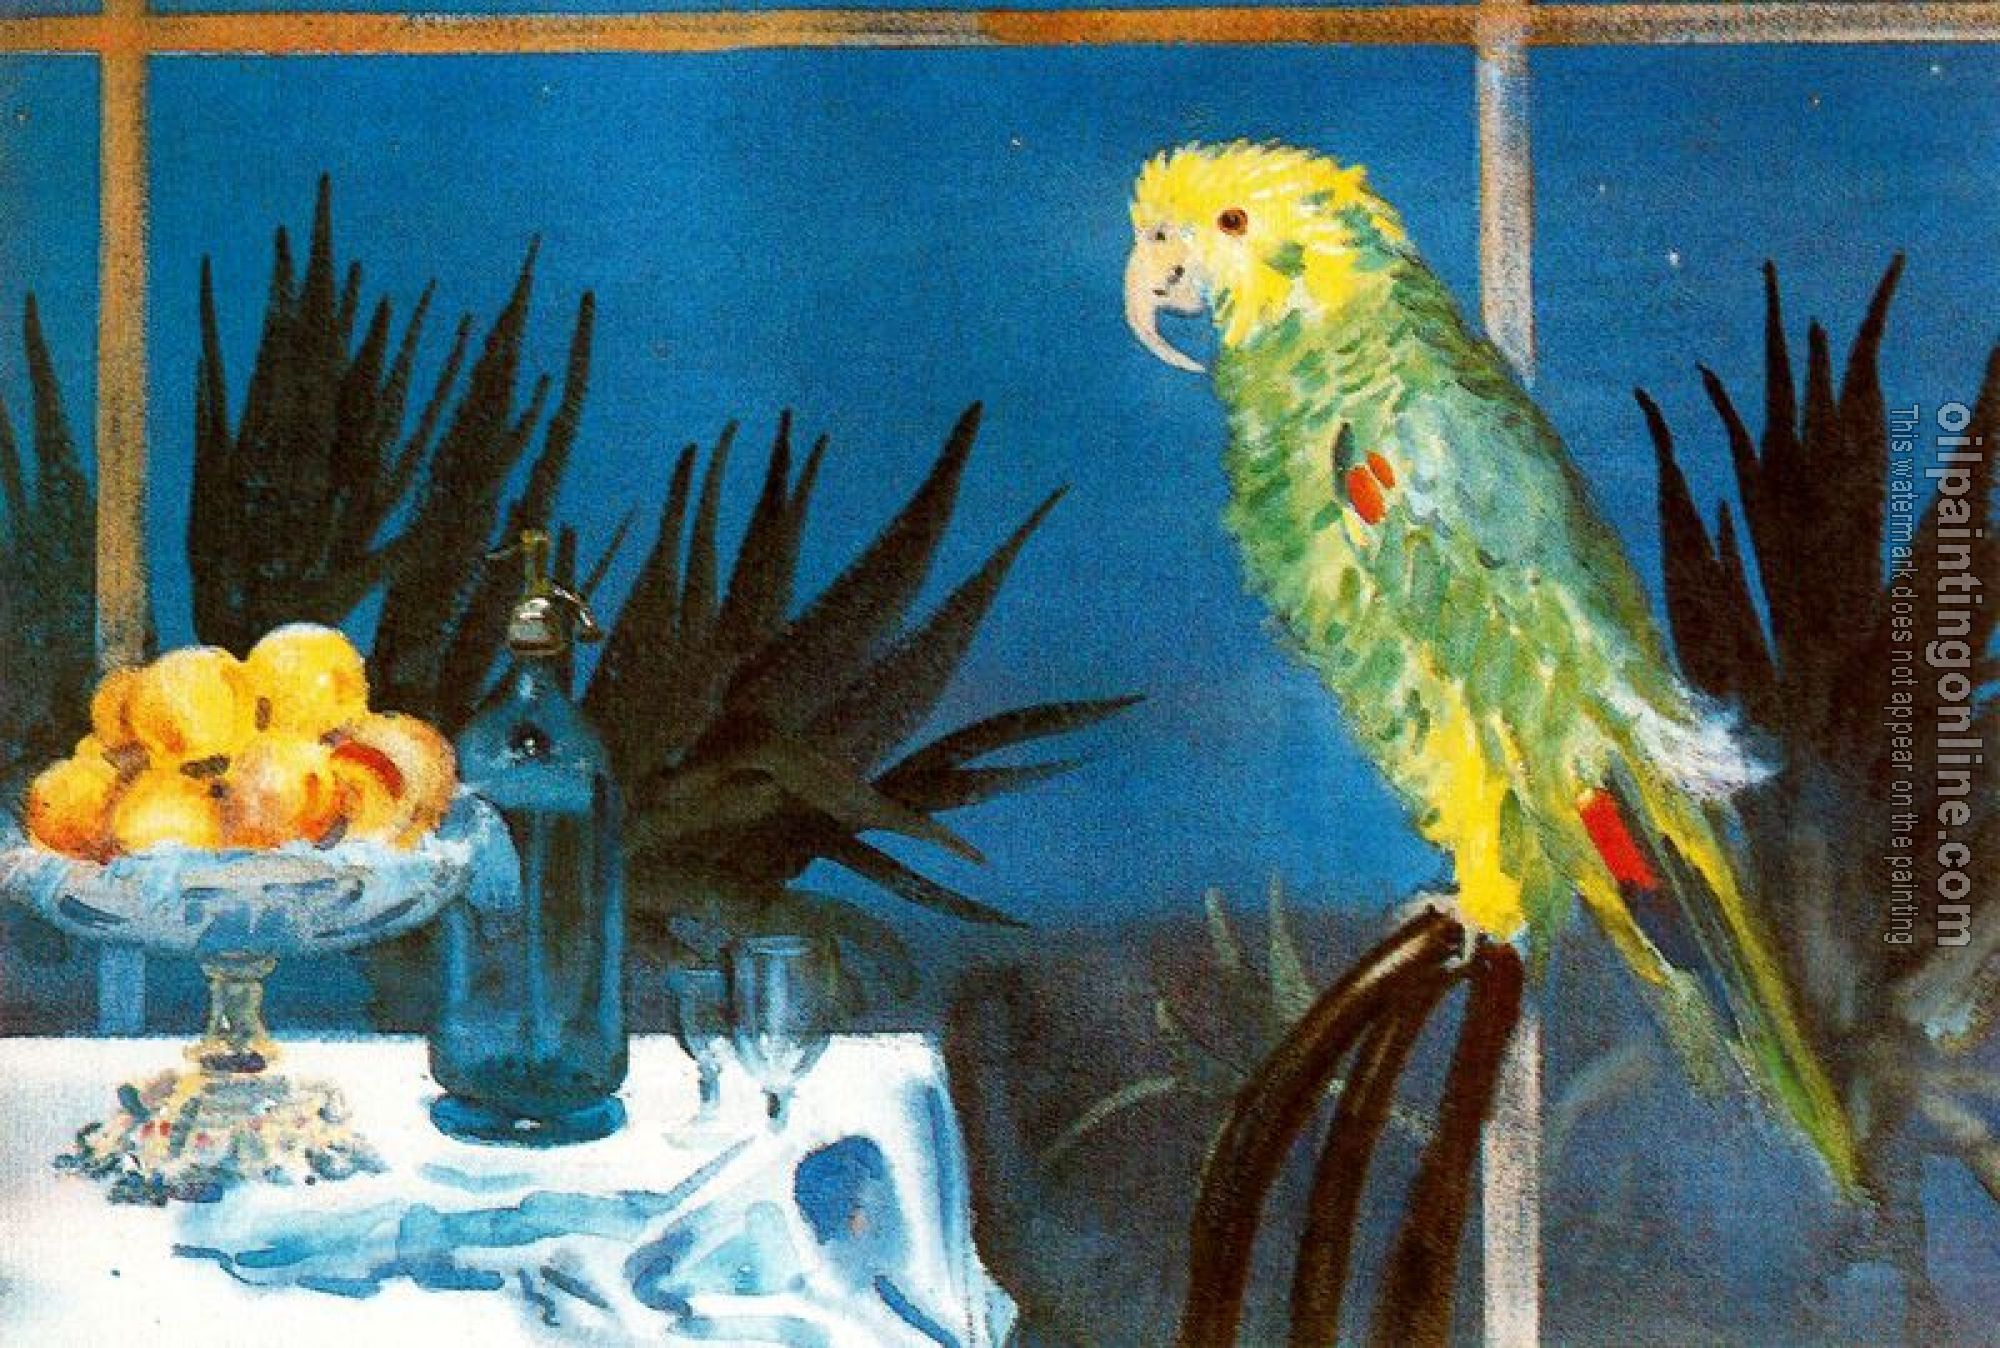 Jorge Apperley - Still Life with Parrot